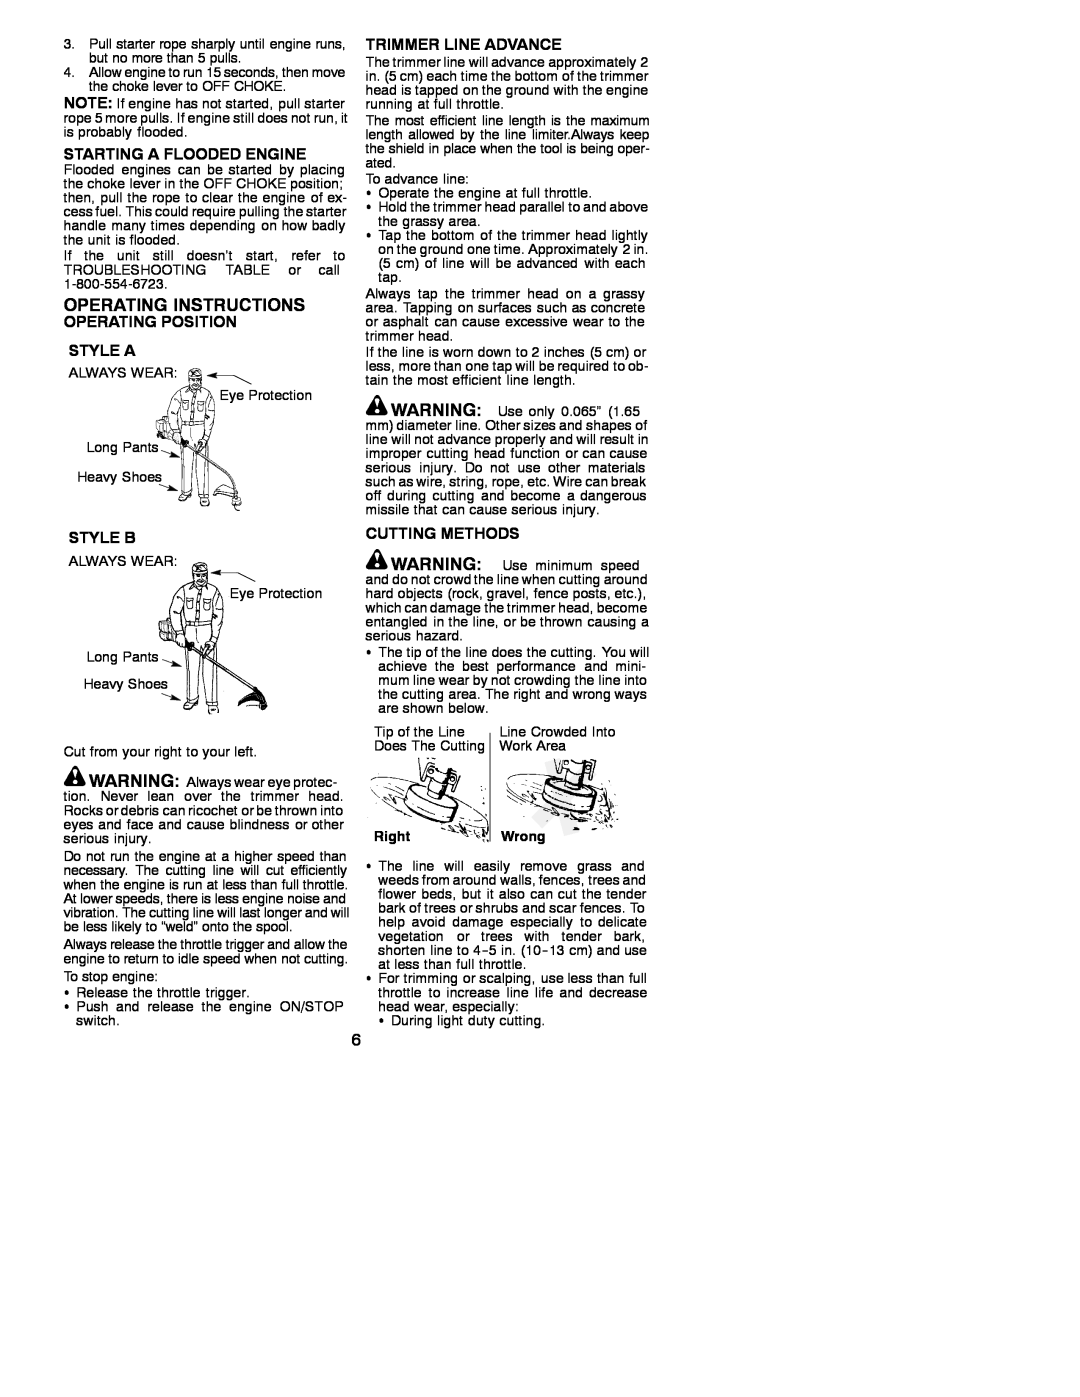 Weed Eater 530088137 Operating Instructions, Starting A Flooded Engine, Operating Position Style A, Trimmer Line Advance 